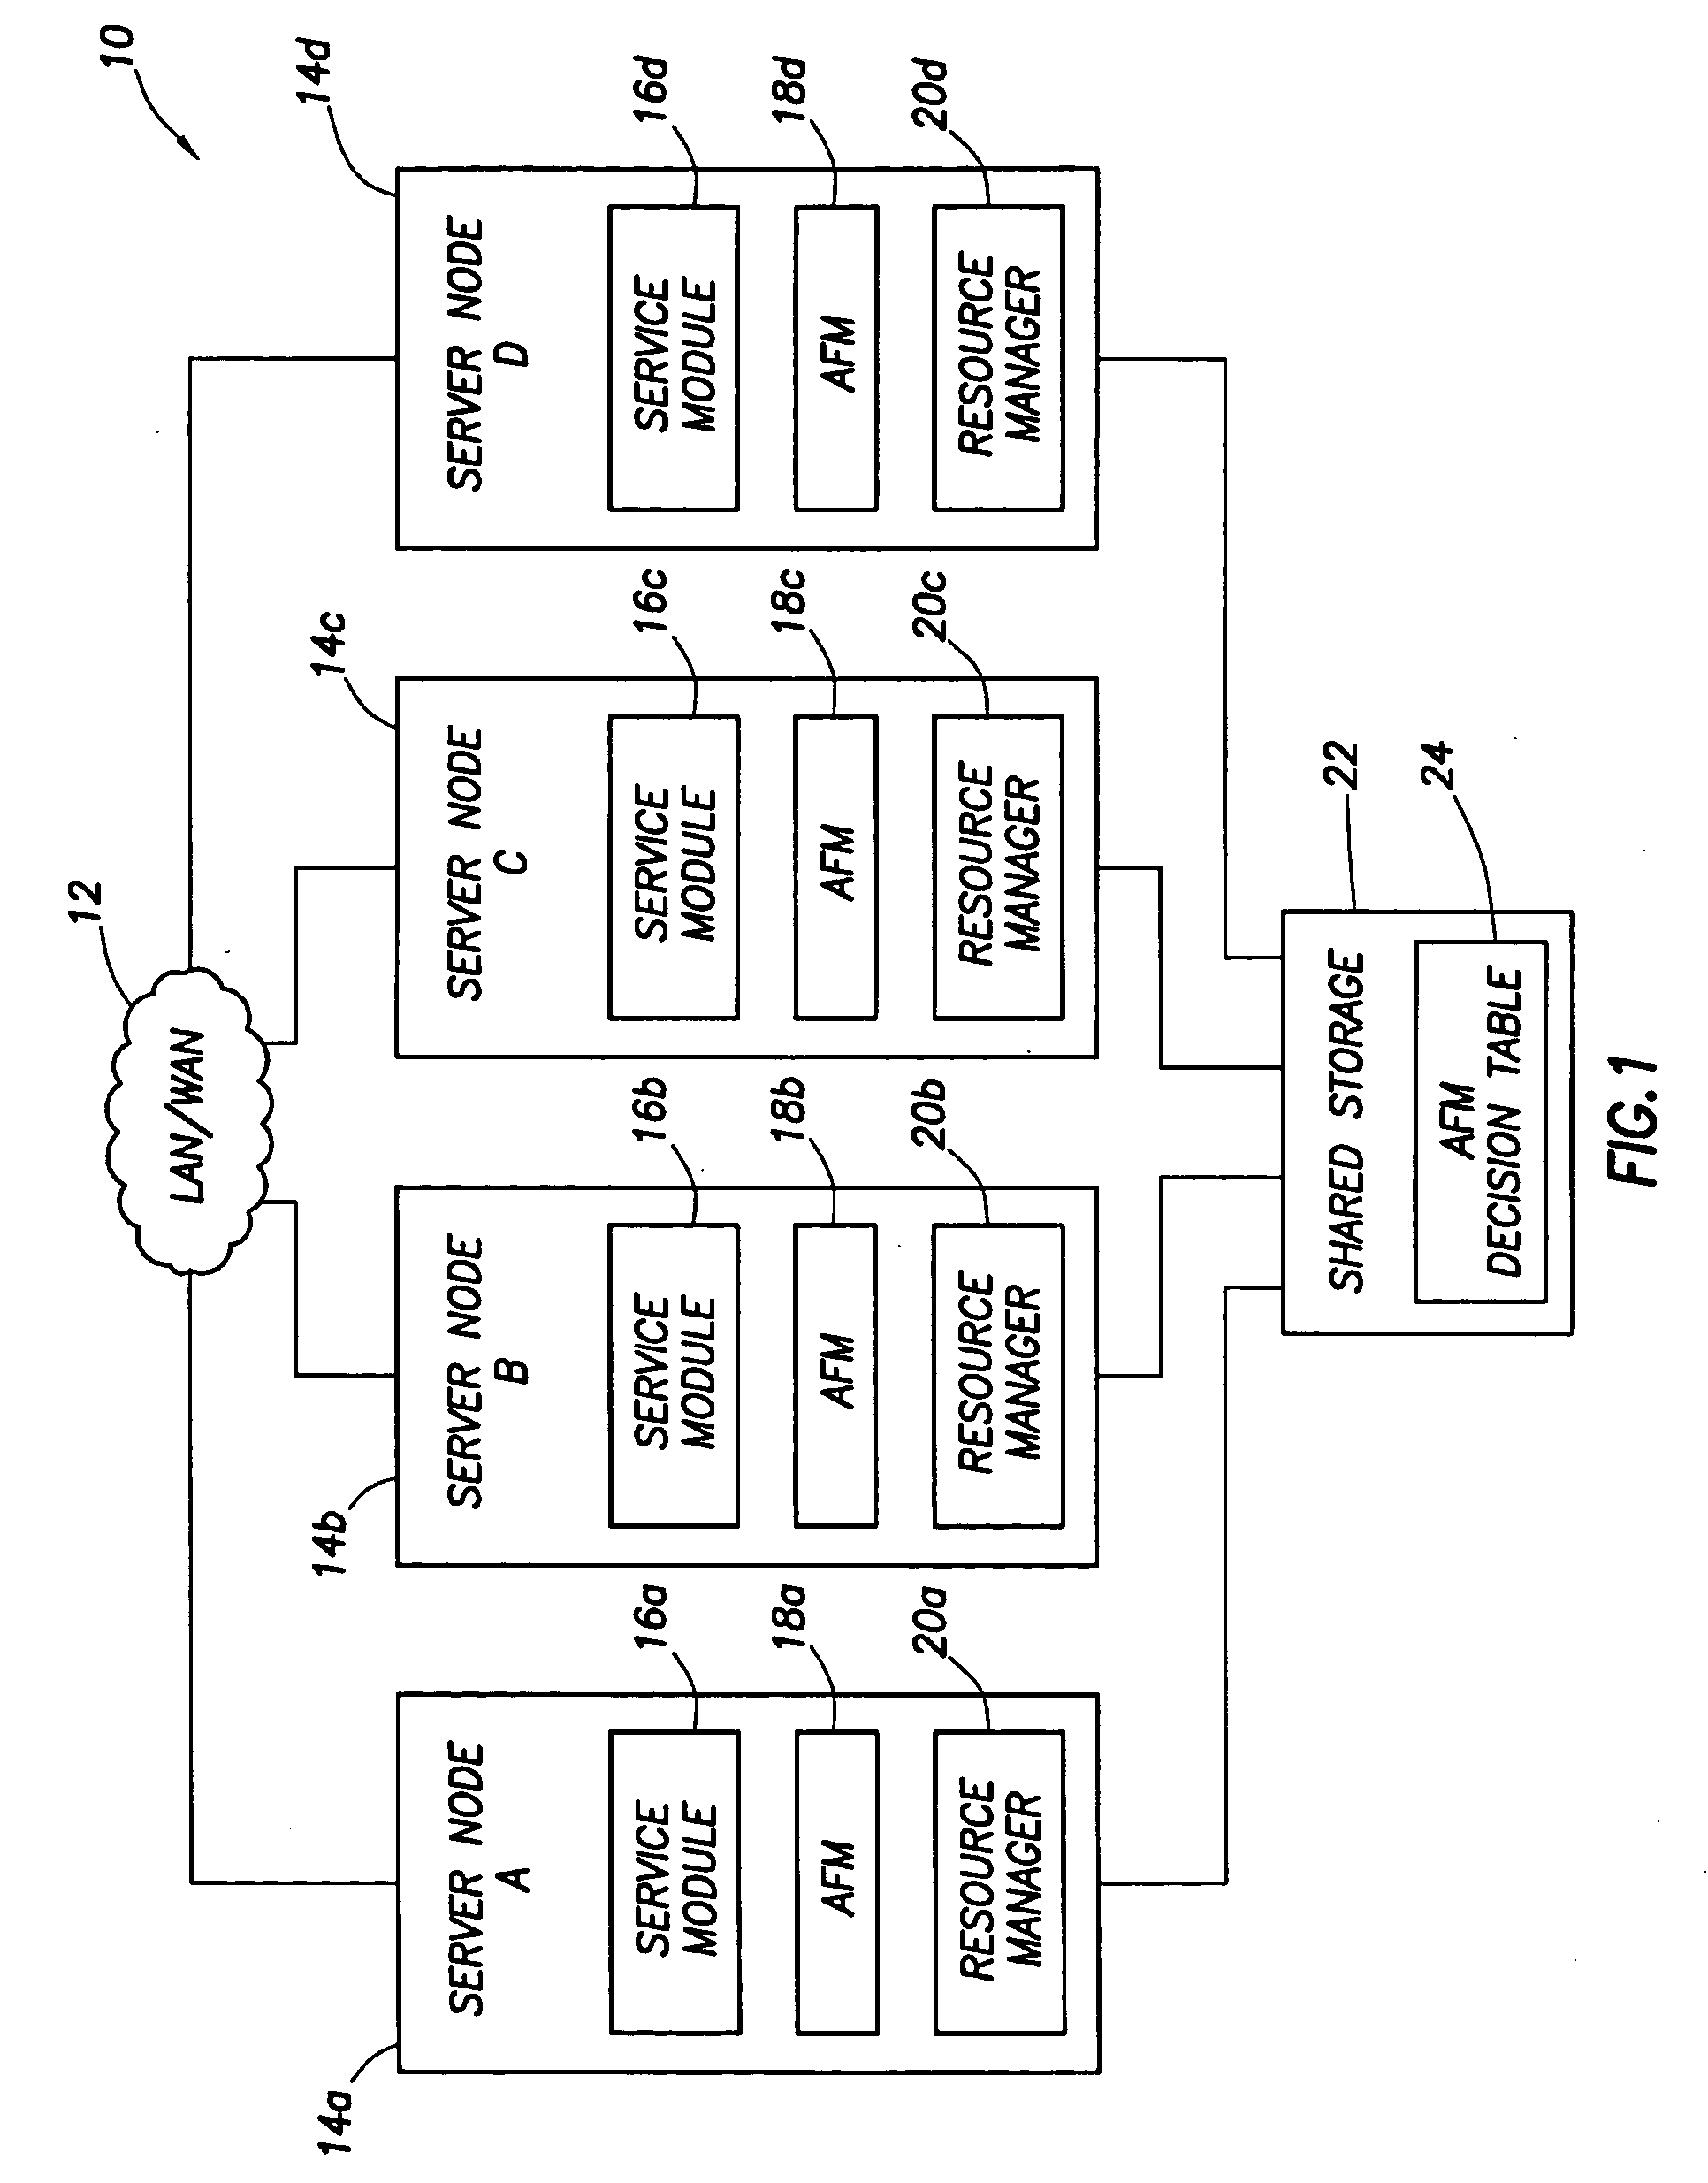 System and method for failure recovery and load balancing in a cluster network